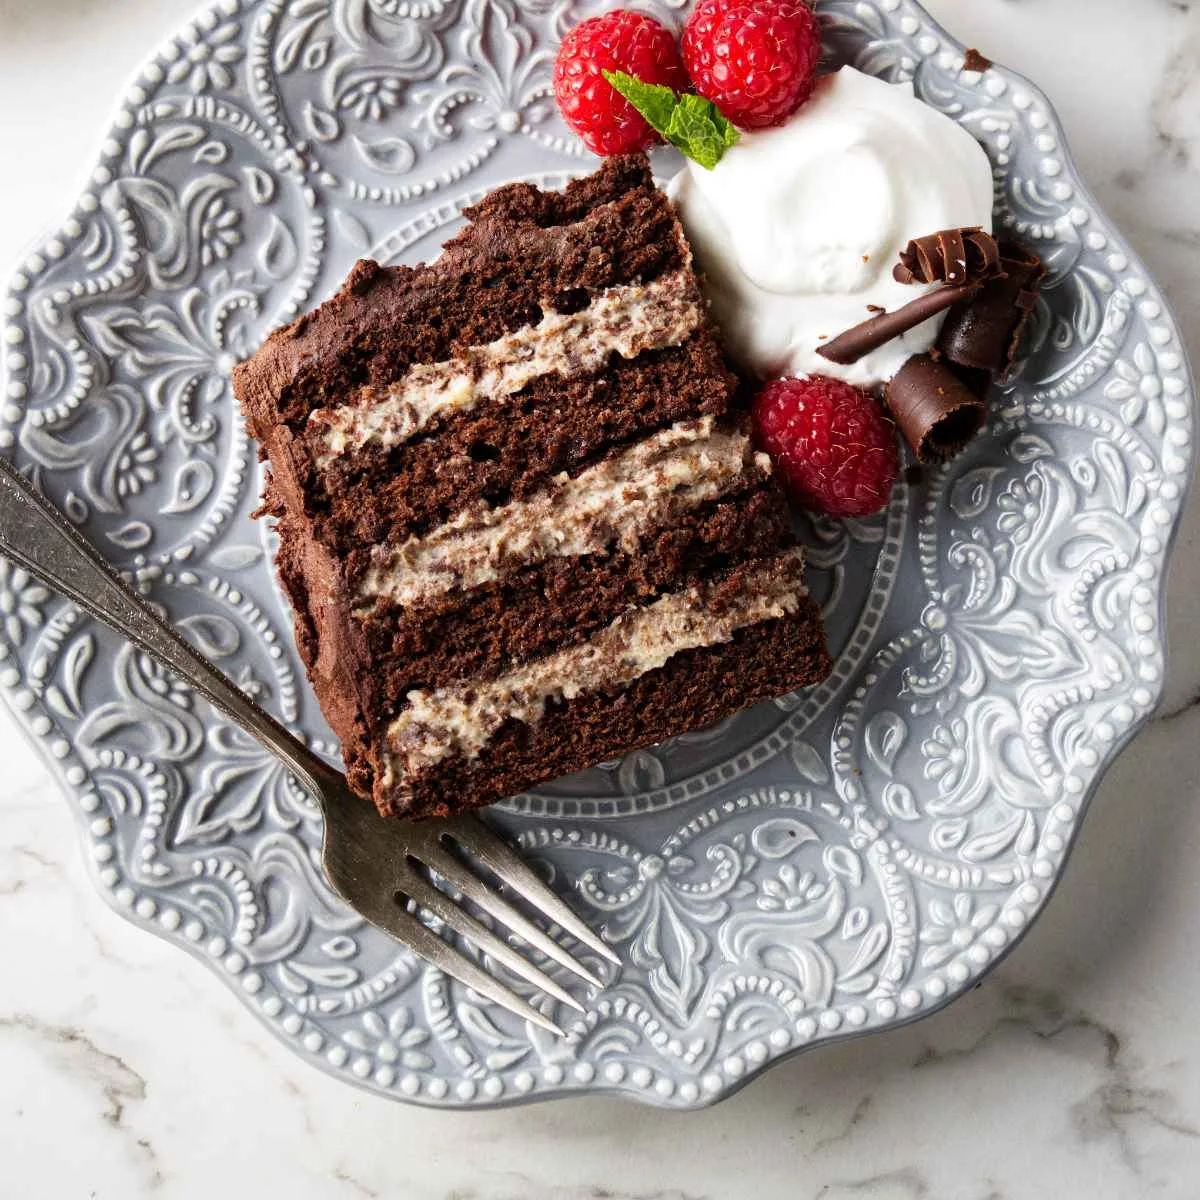 A slice of a chocolate cassata cake with four layers of ricotta filling.